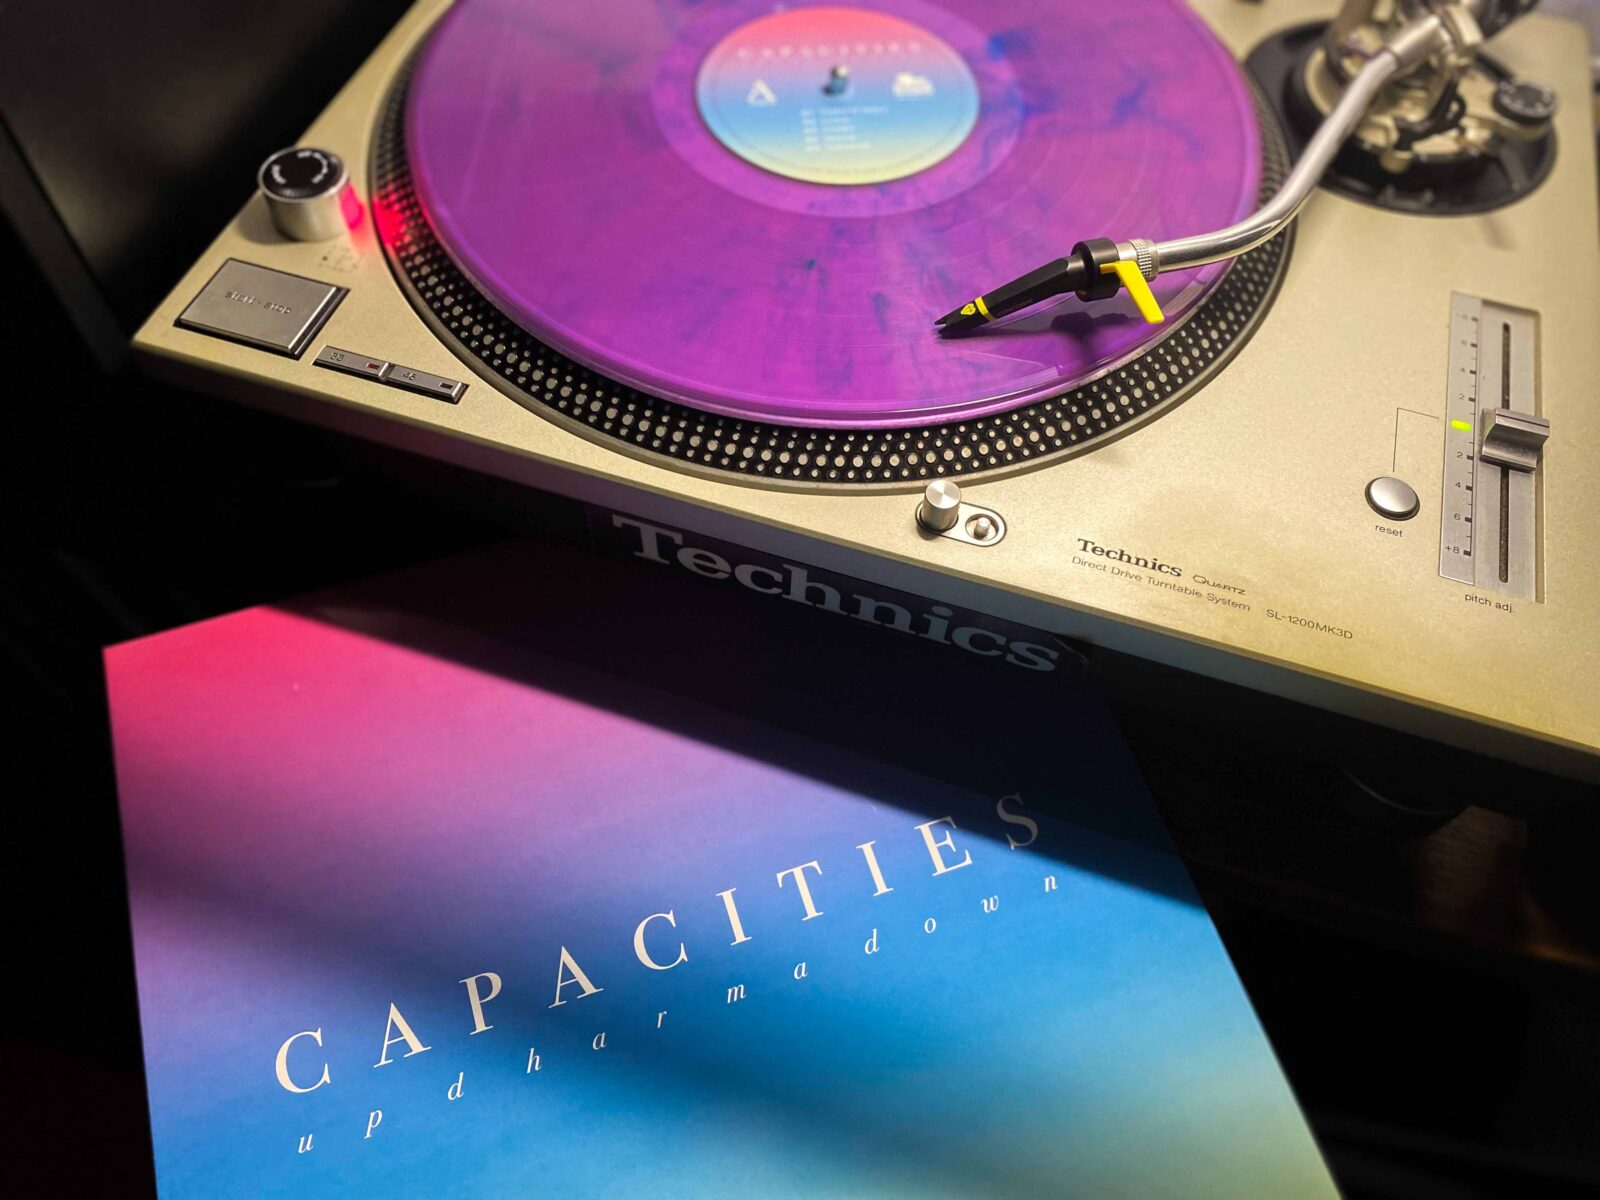 Vinyl Record of Capacities by Up Dharma Down